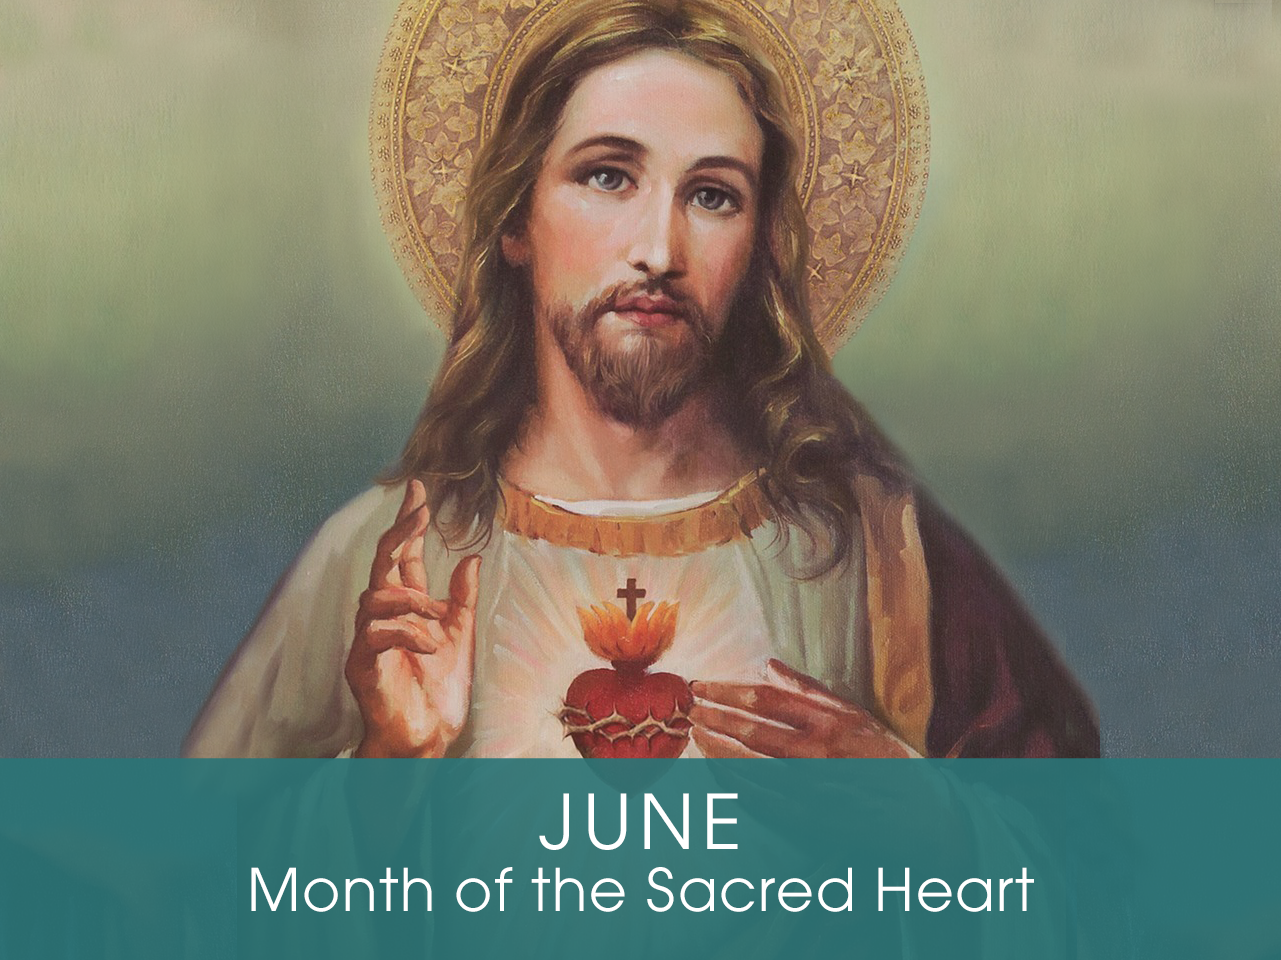 Month of the Sacred Heart of Jesus